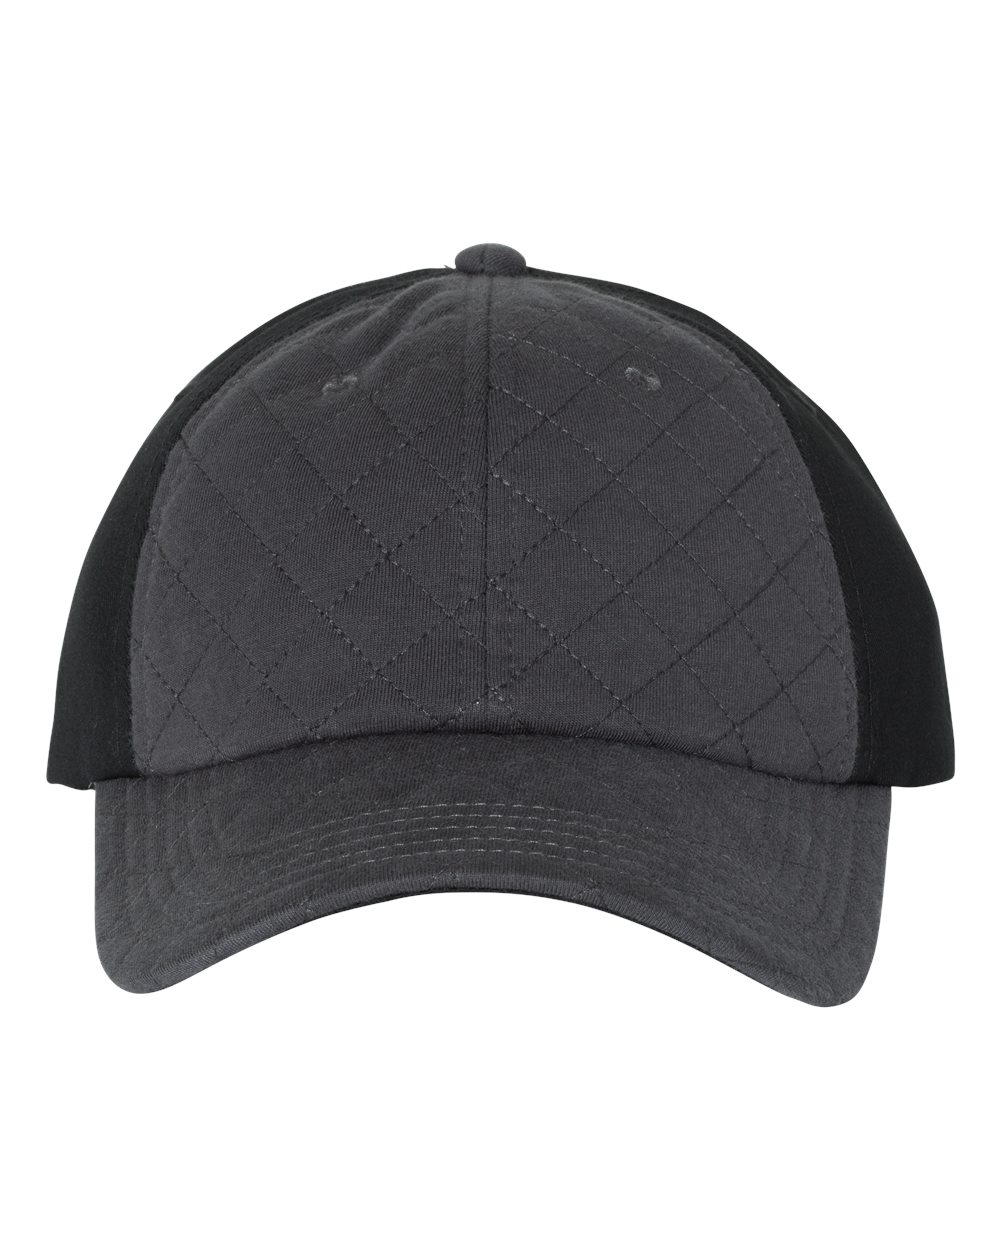 Sportsman - SP960 - Quilted Front Cap $6.90 - Headwear